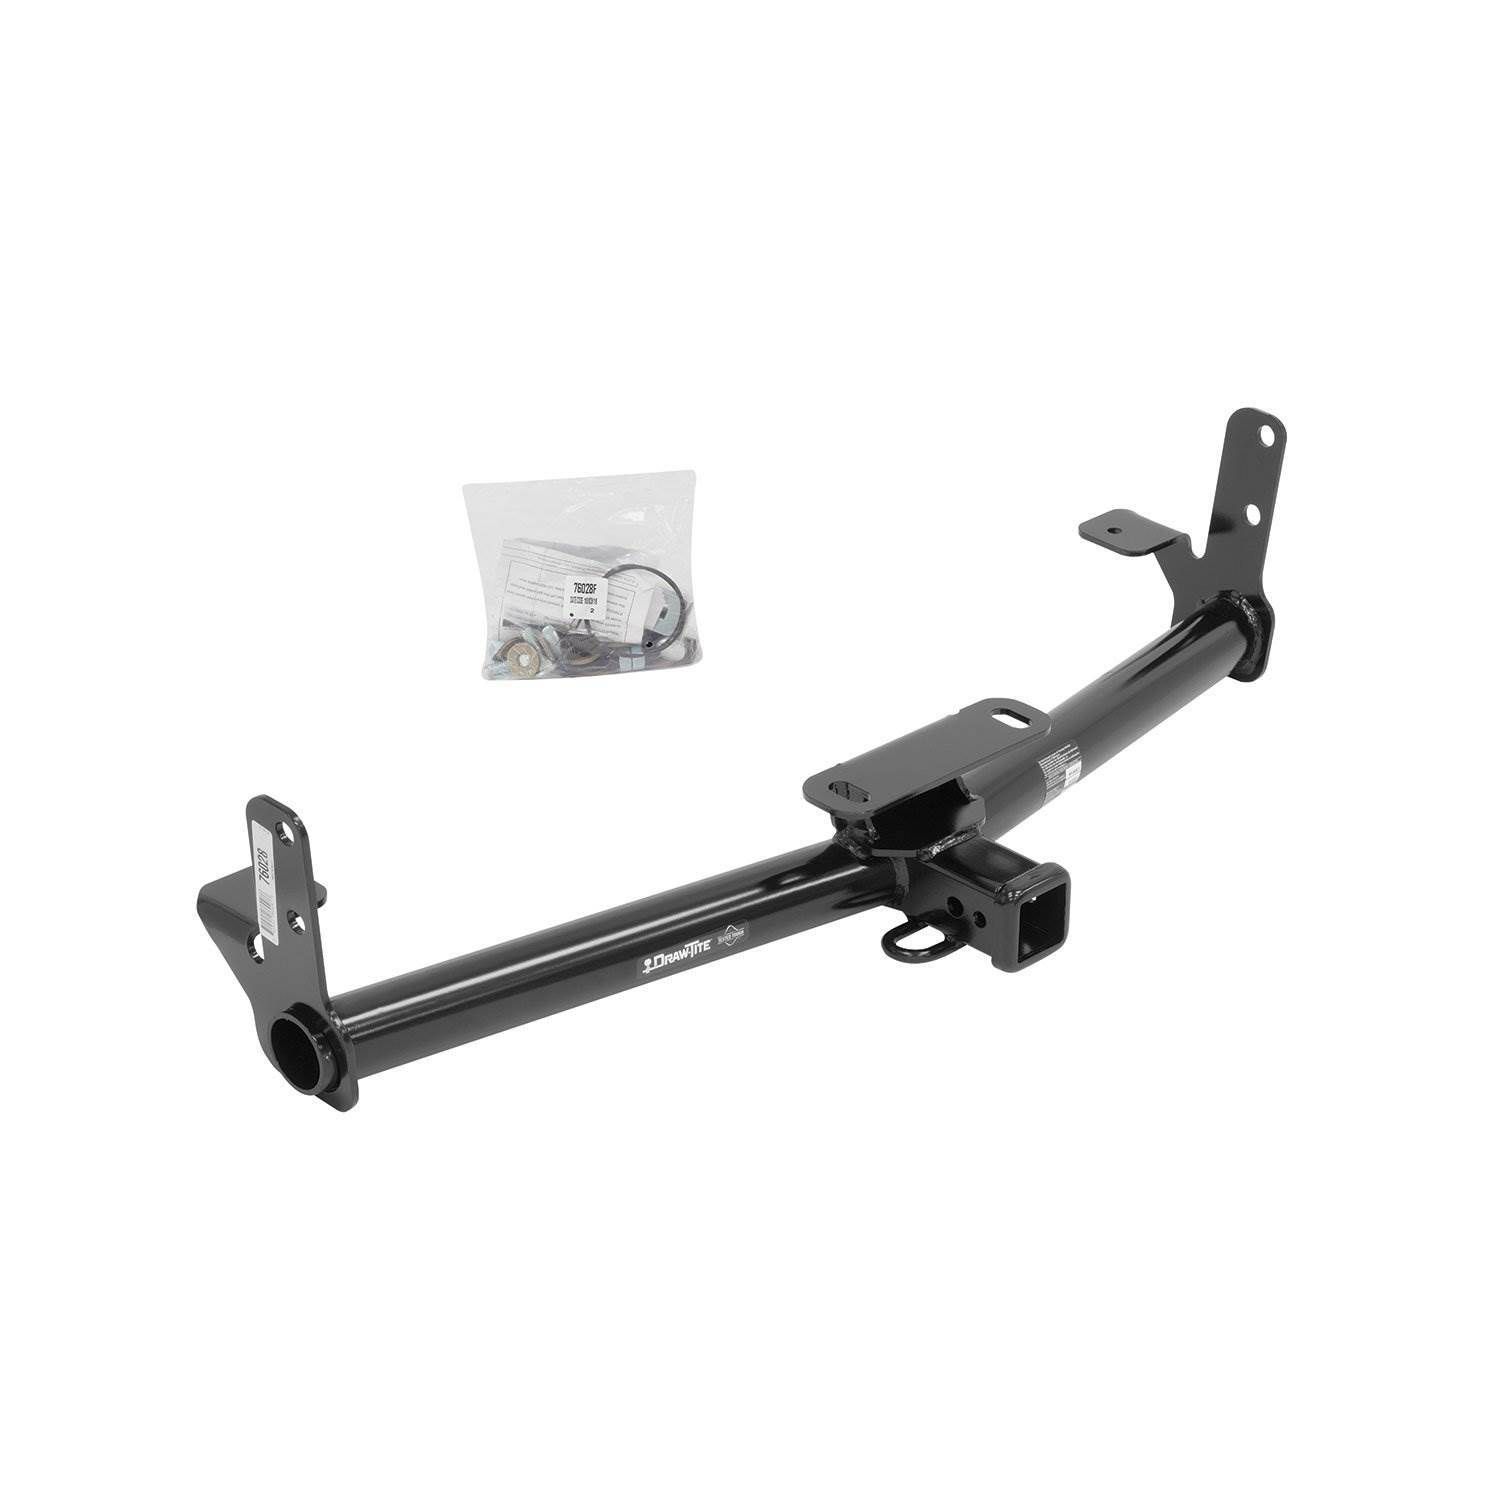 Image for Draw-Tite Draw Tite Class III/IV Receiver Trailer Hitch for Equinox/Terrrain/Torrent/Vue at Kohl's.